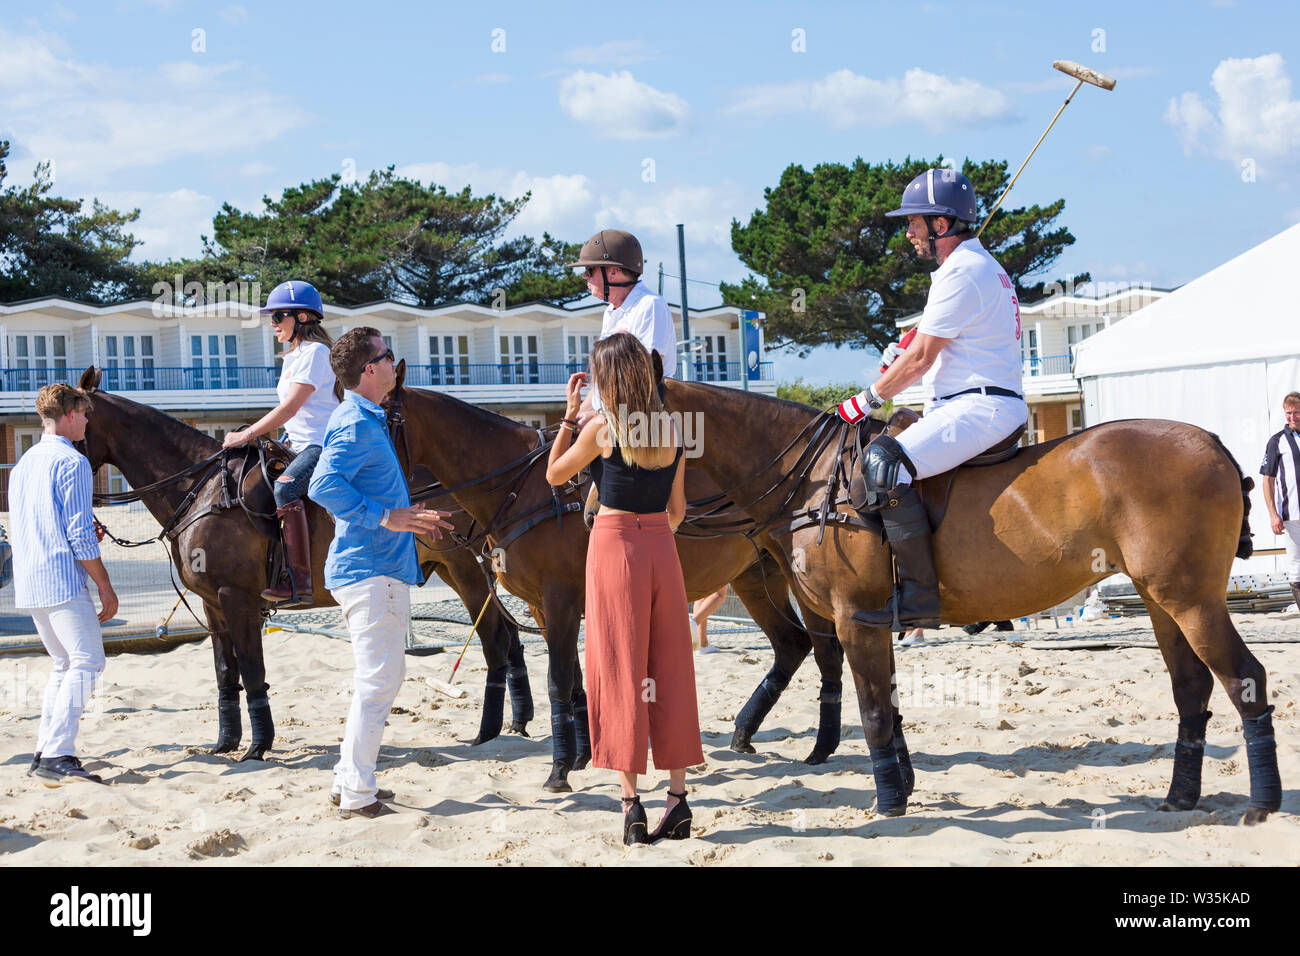 Sandbanks, Poole, Dorset, UK 12th July 2019. The Sandpolo British Beach Polo Championships gets underway at Sandbanks beach, Poole on a warm sunny day. The largest beach polo event in the world, the two day event takes place on Friday and Saturday, as visitors head to the beach to see the action. Nick Knowles, Rita Simons and Harry Redknapp attend for a penalty shoot out. Credit: Carolyn Jenkins/Alamy Live News Stock Photo